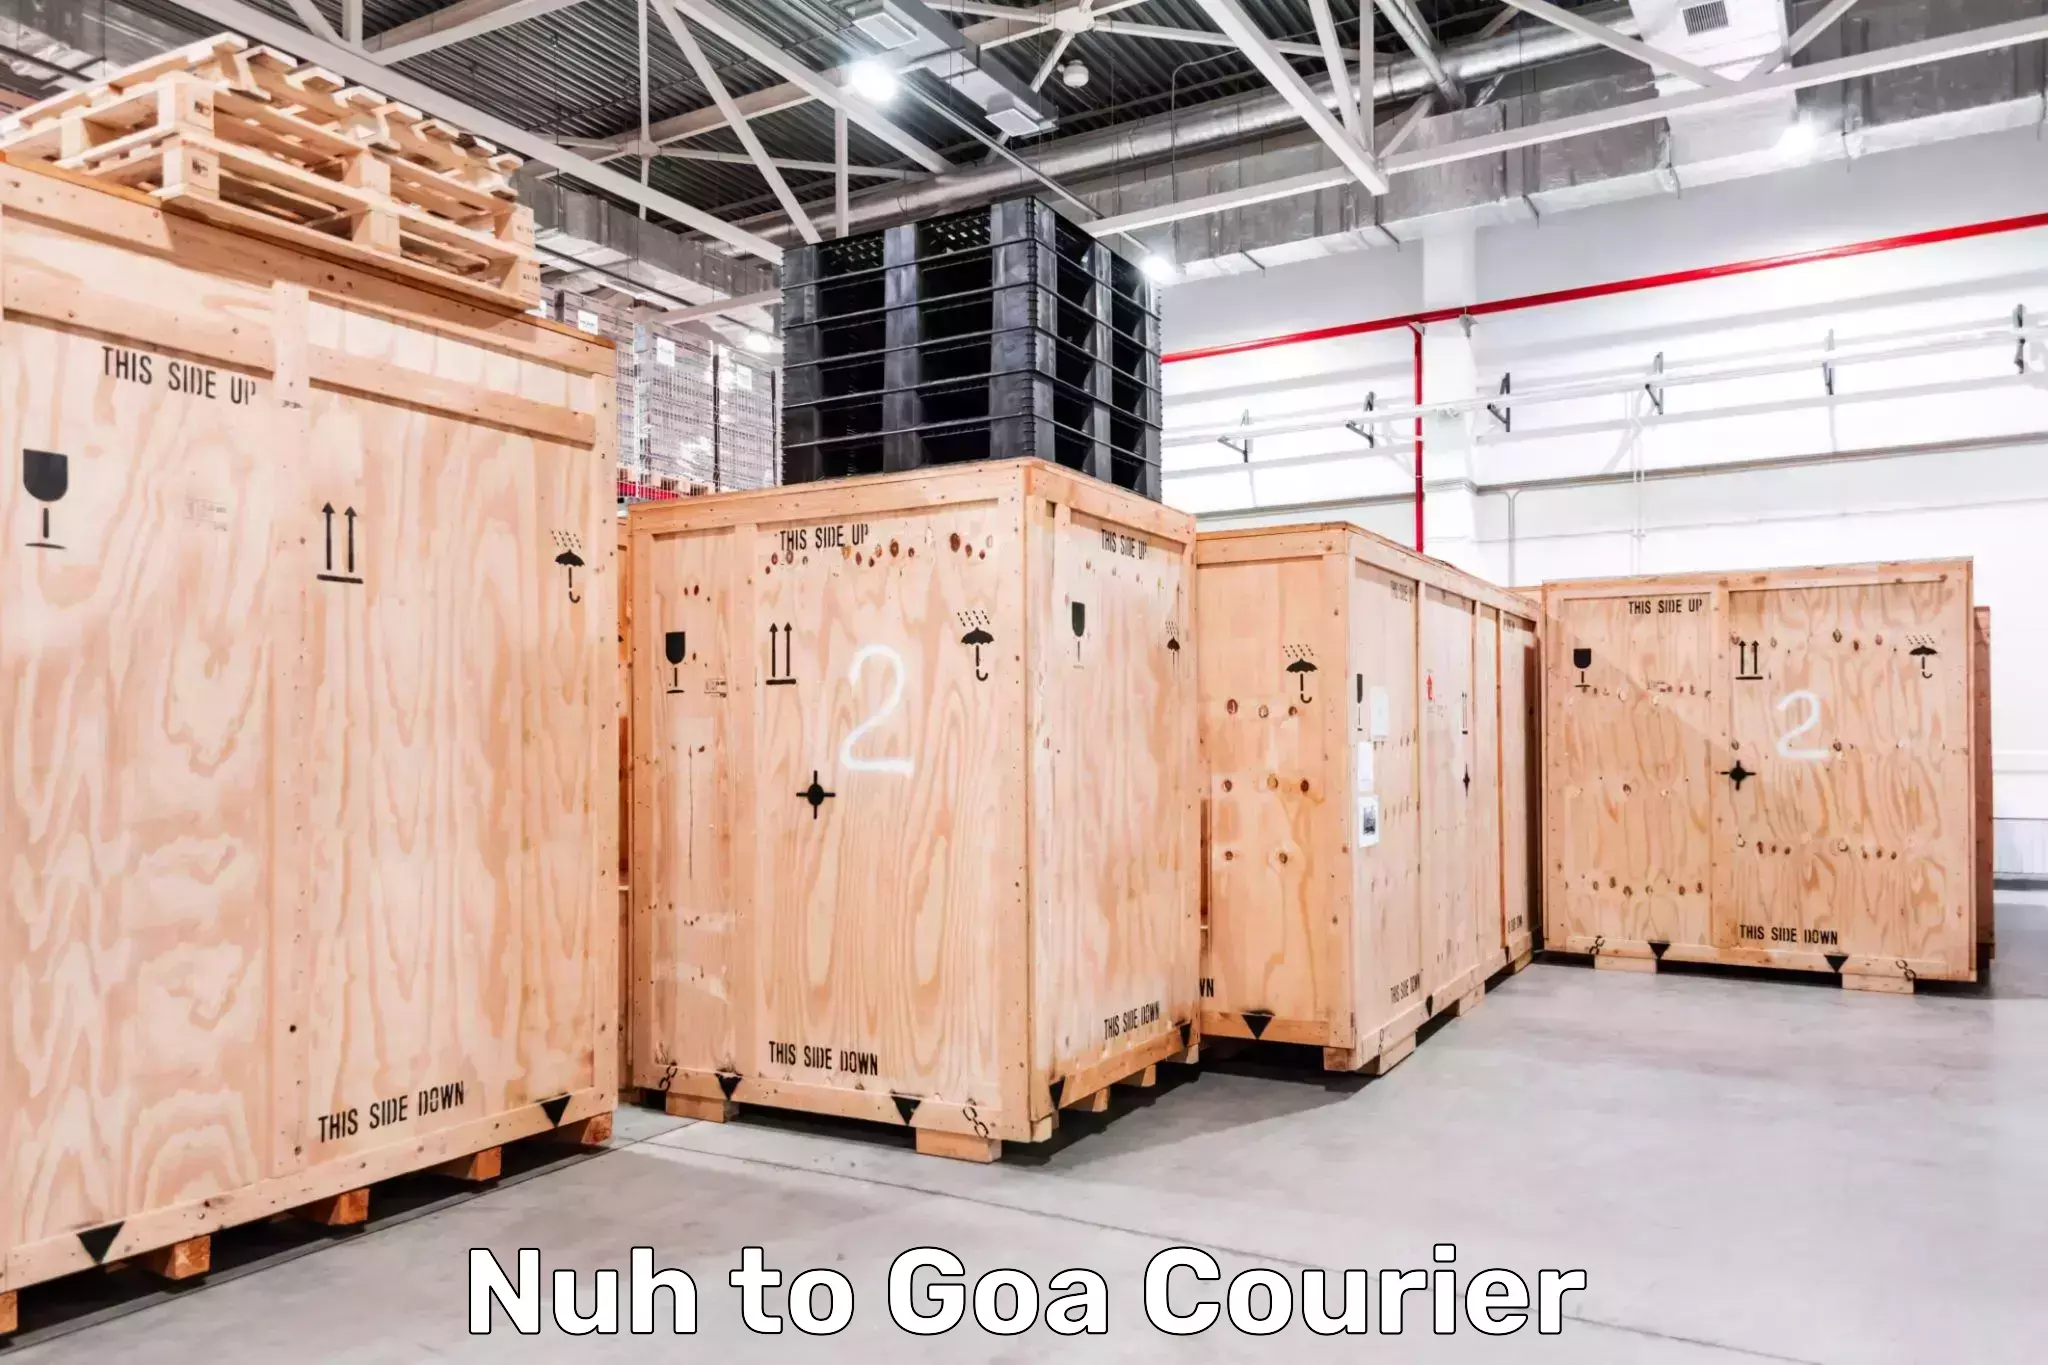 Rural area delivery Nuh to Goa